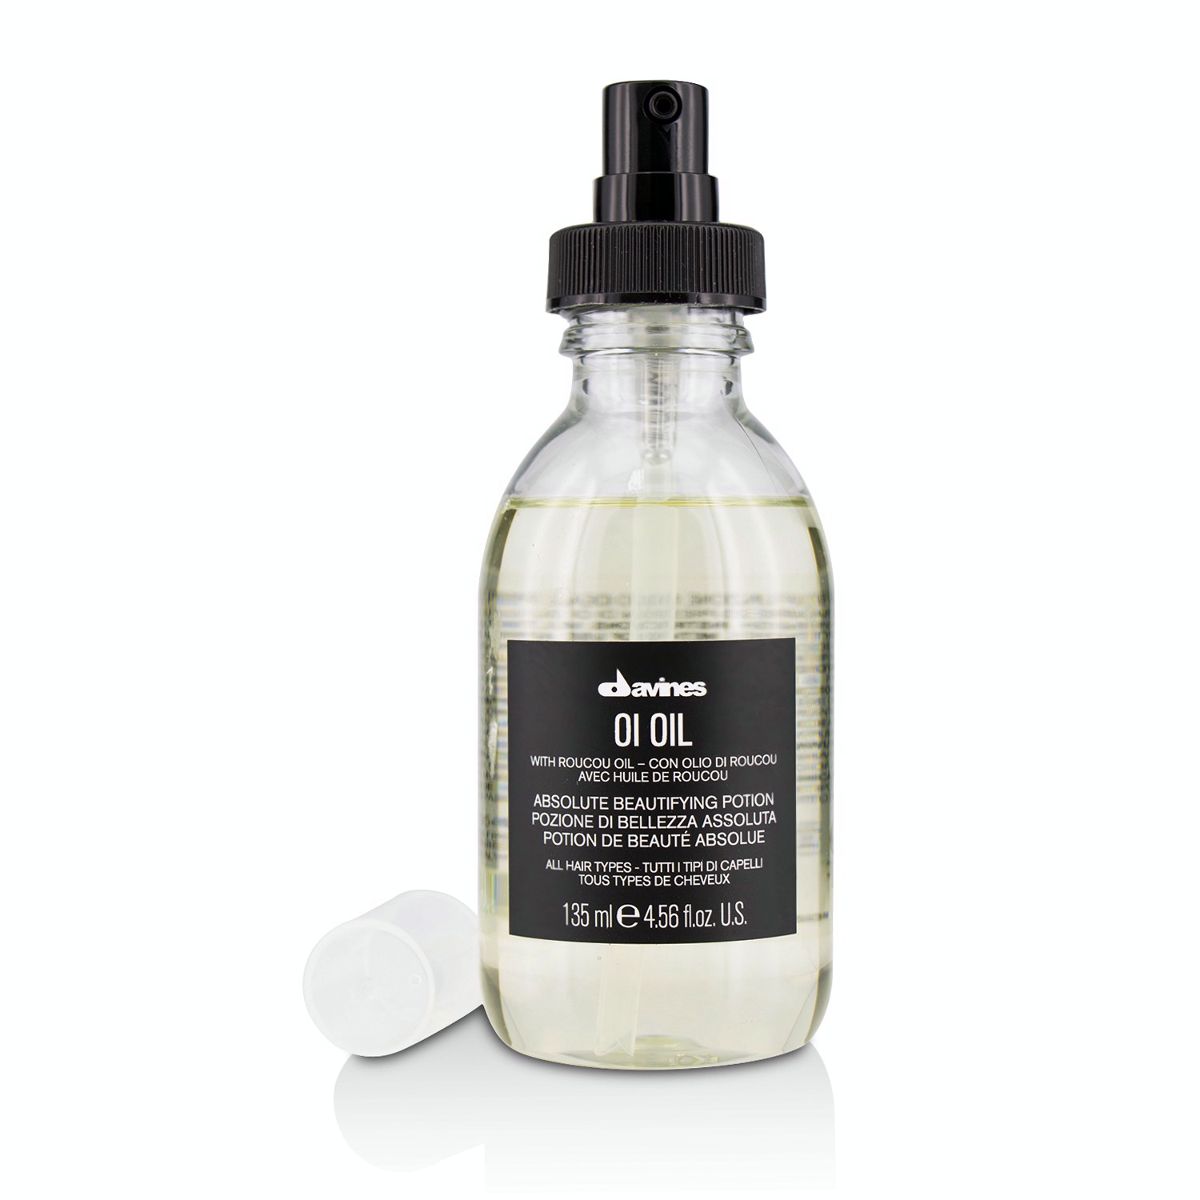 OI Oil Absolute Beautifying Potion (For All Hair Types) Davines Image